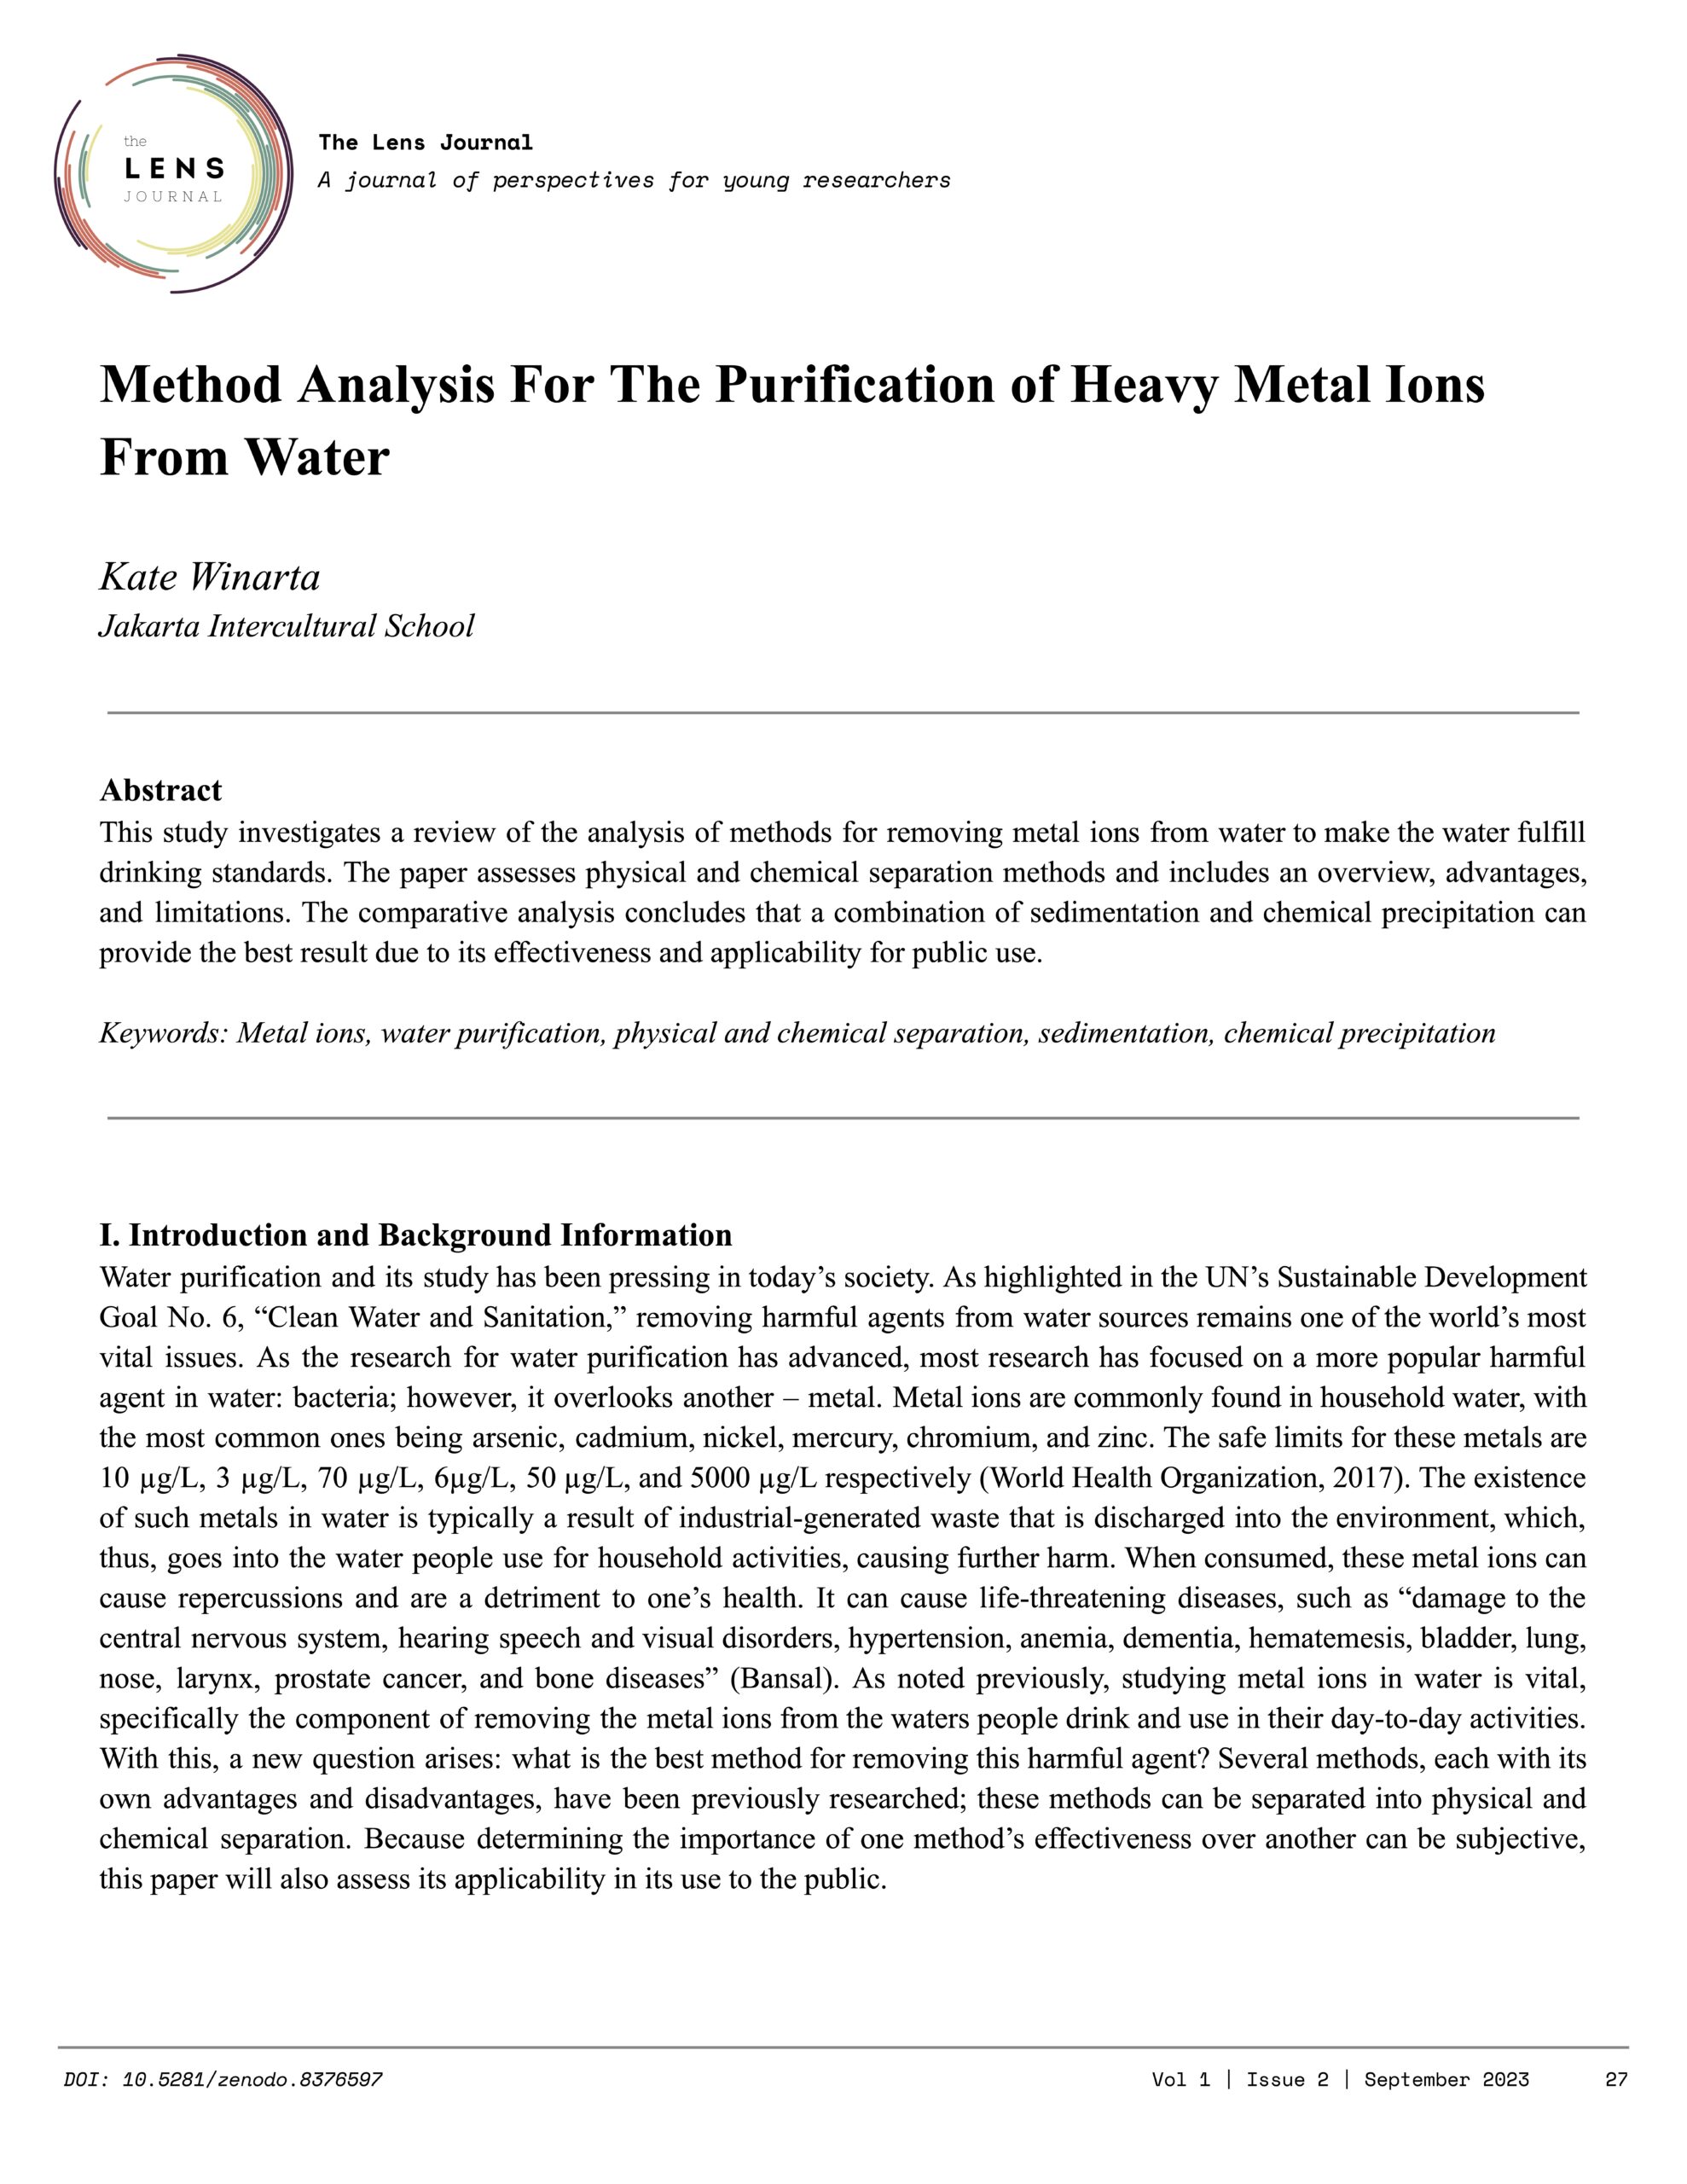 Method Analysis For The Purification of Heavy Metal Ions From Water